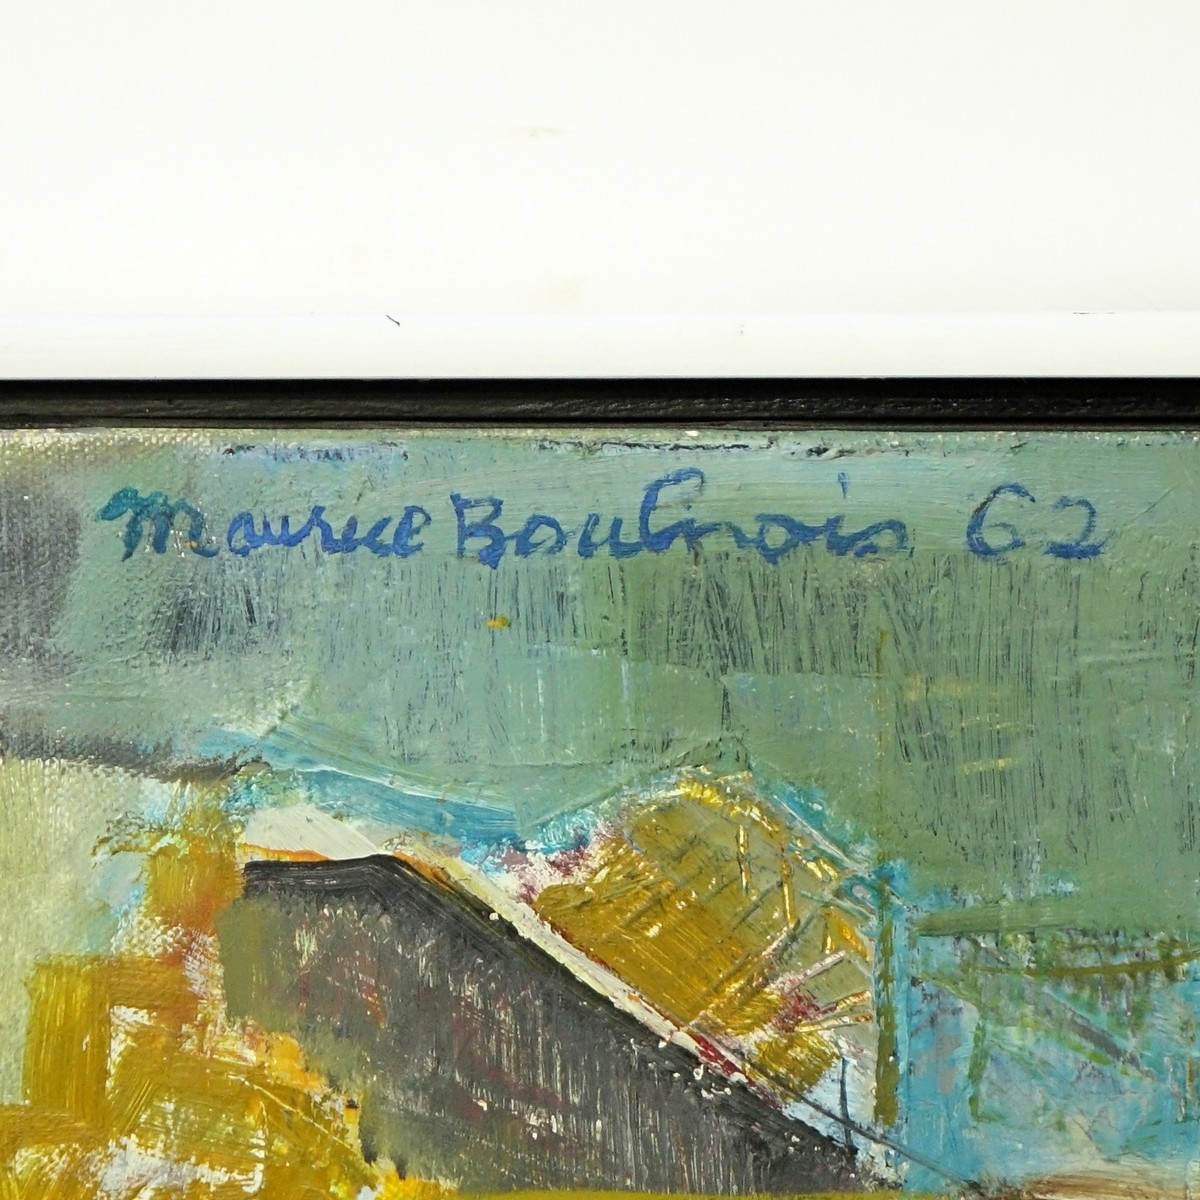 Maurice Boulnois, France (1918-2011) Oil on Canvas, Abstract Street Scene, Signed and Dated 1962 Top Left. Inscribed on stretcher.